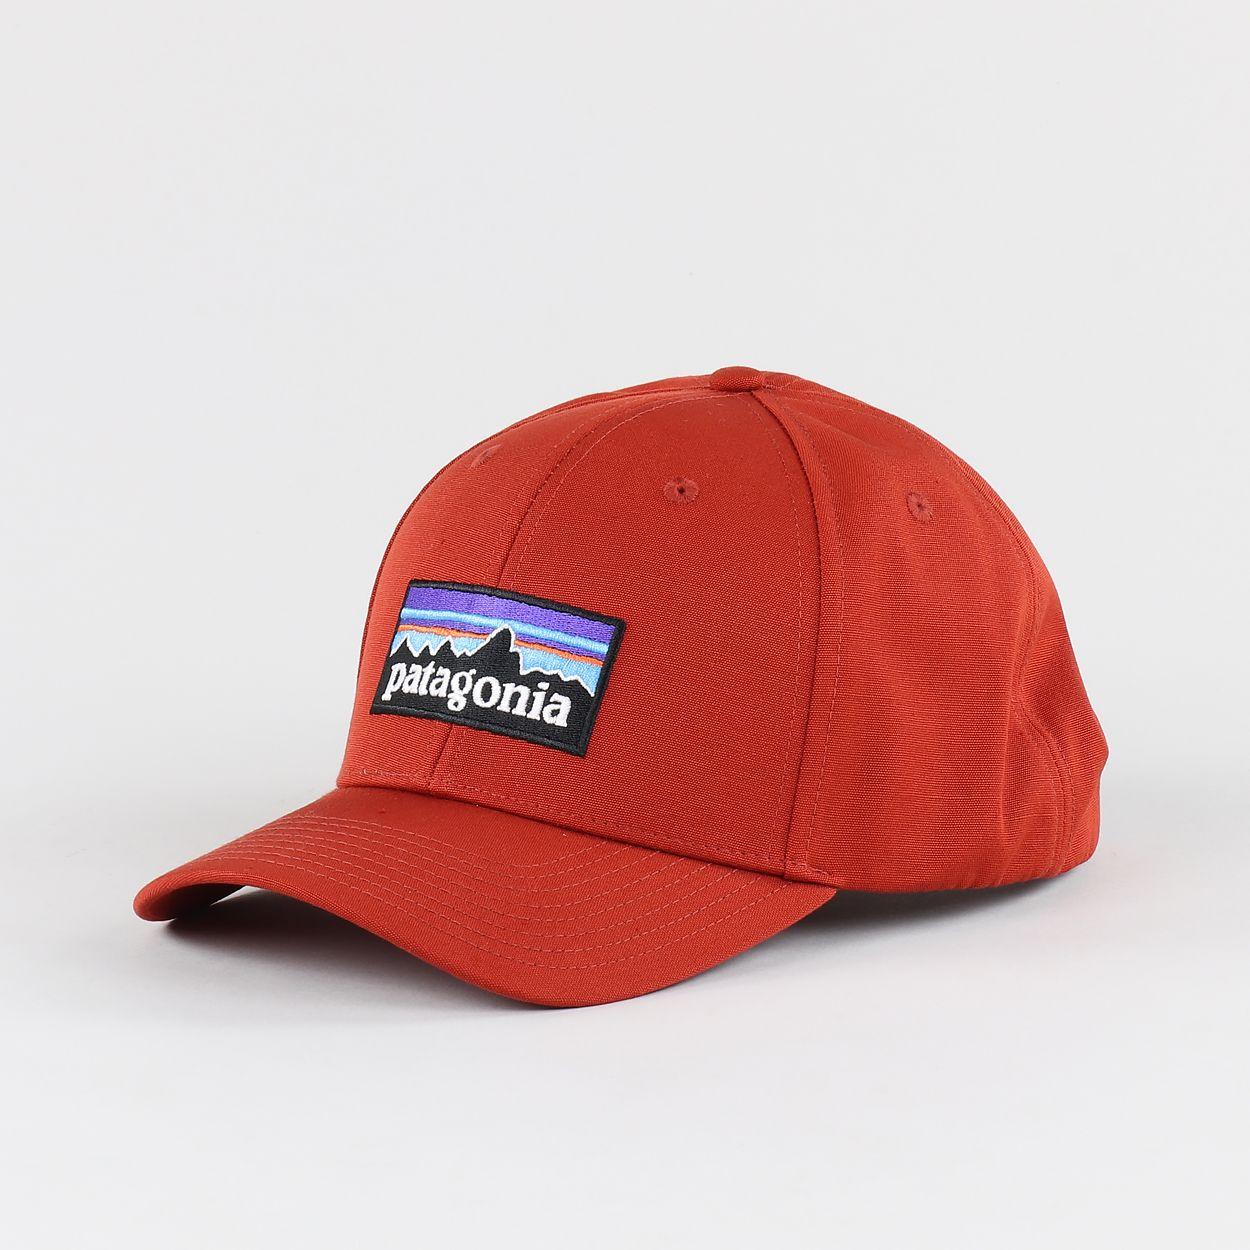 Red Roots Logo - Patagonia P6 Logo Roger That Cap Roots Red One Size Adjustable £17.50